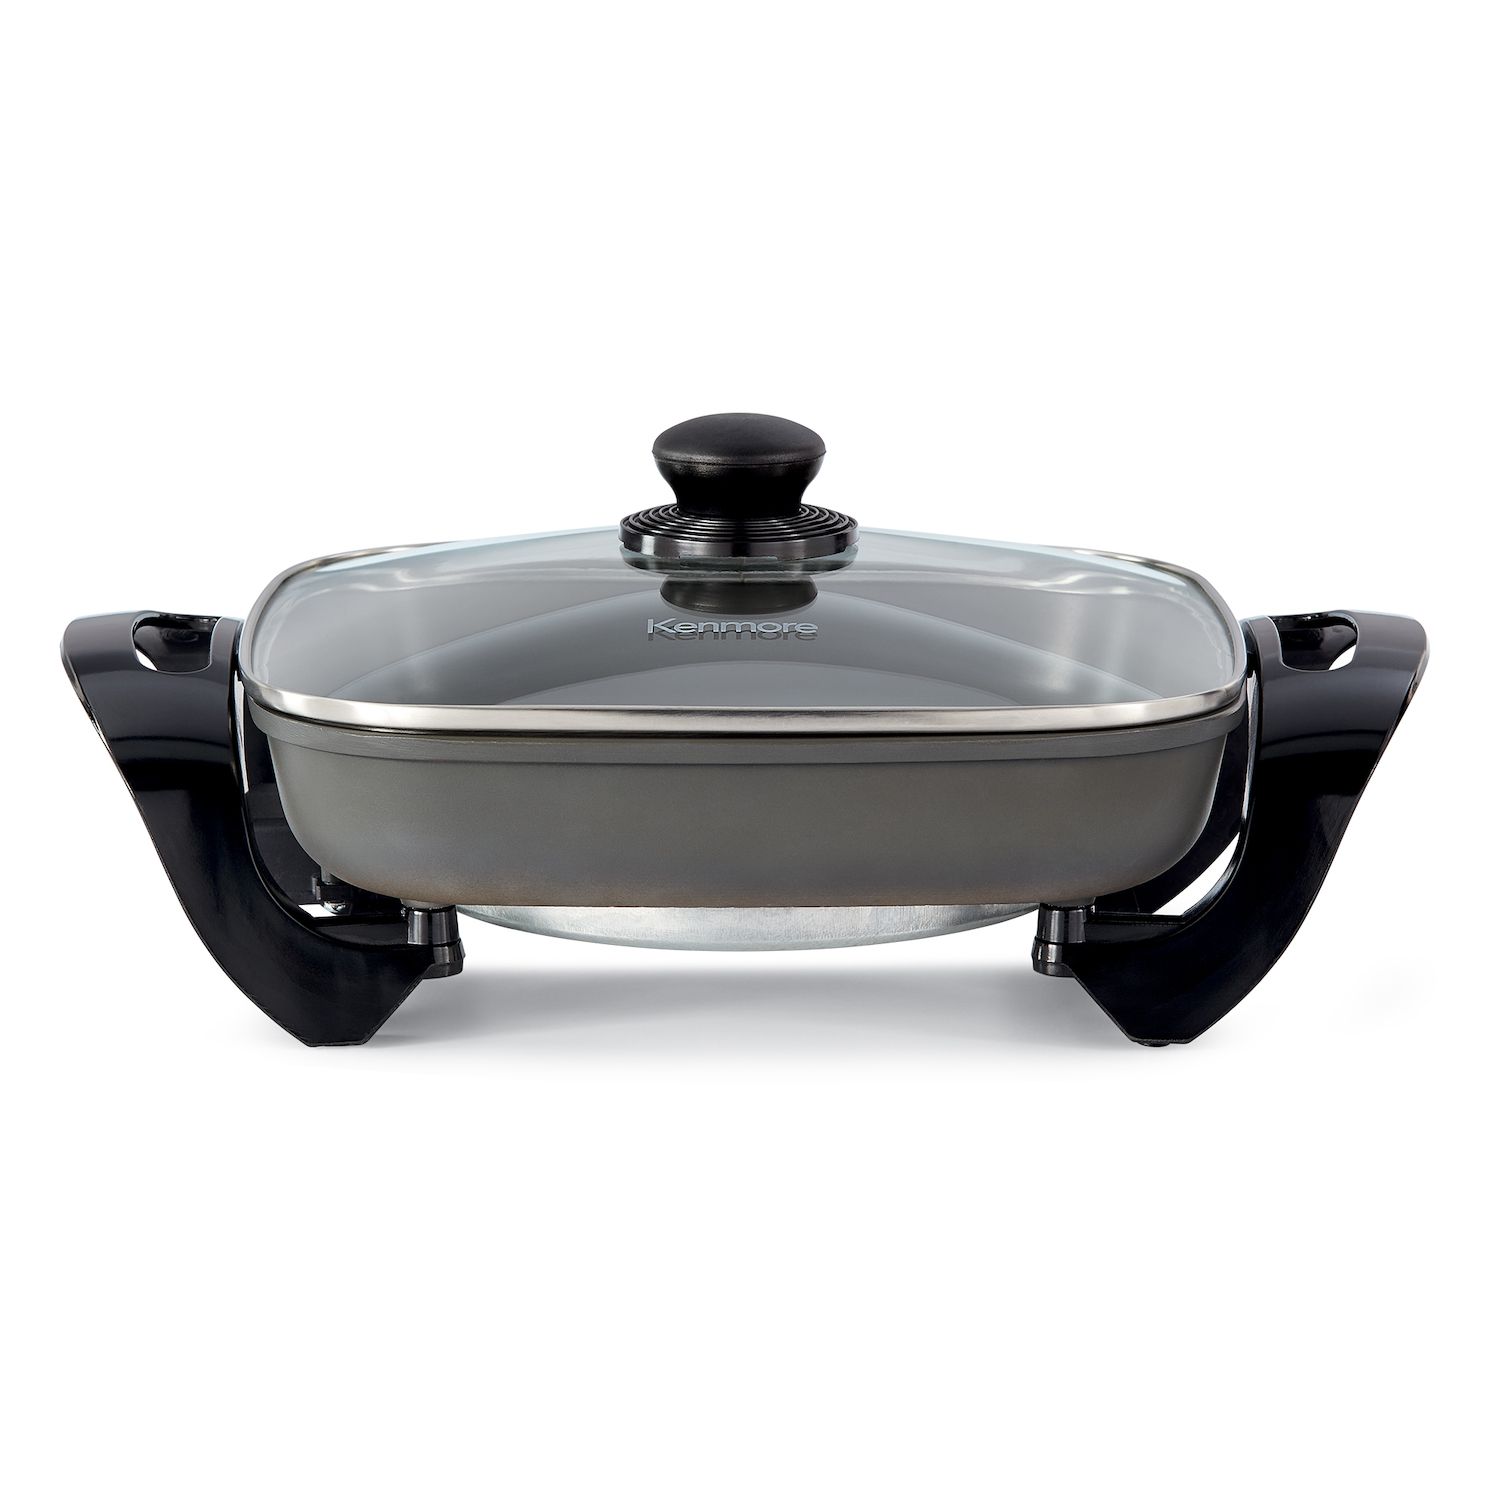 Brentwood Sk-46 8-inch Nonstick Electric Skillet In Black With Lid